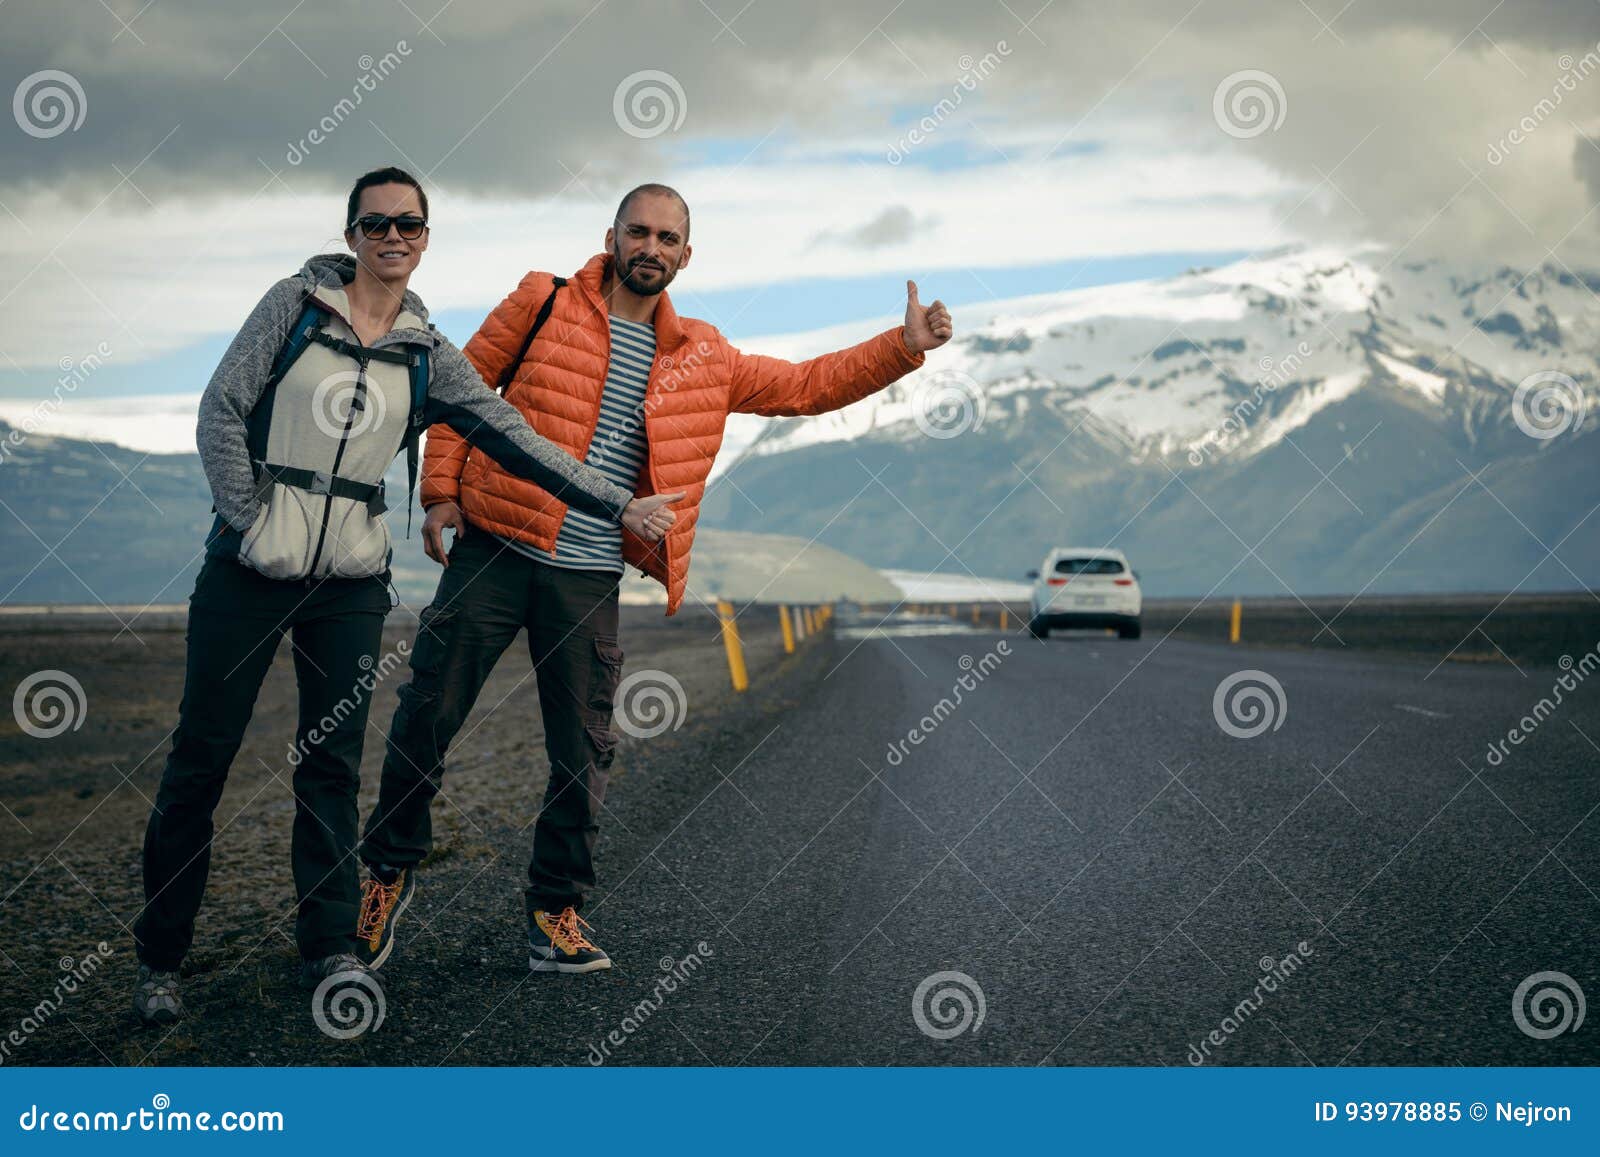 travel hitchhiker couple on a road